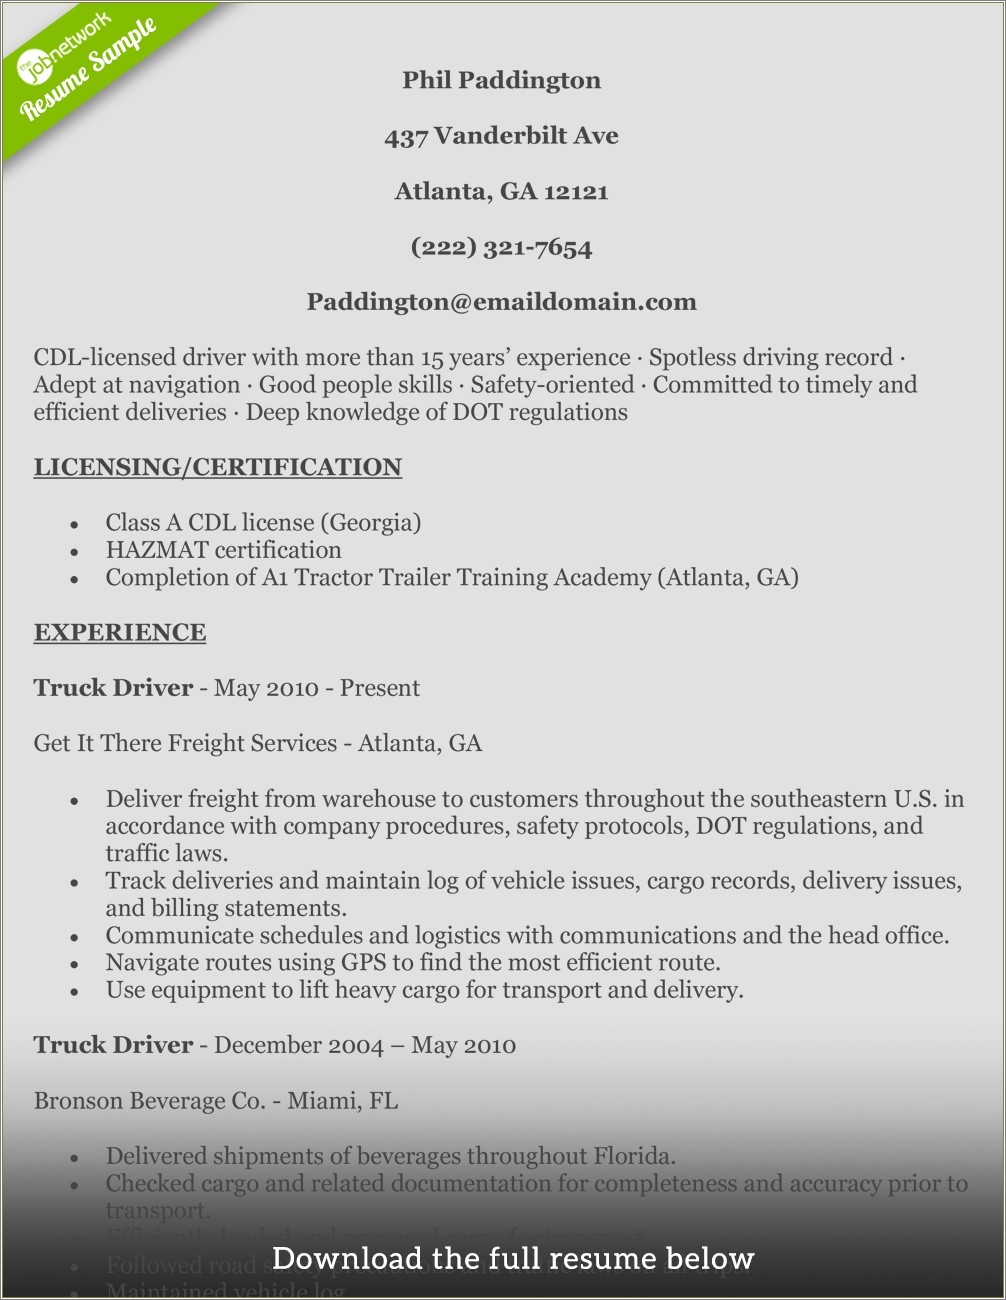 Resume For Pizza Delivery Driver No Experience